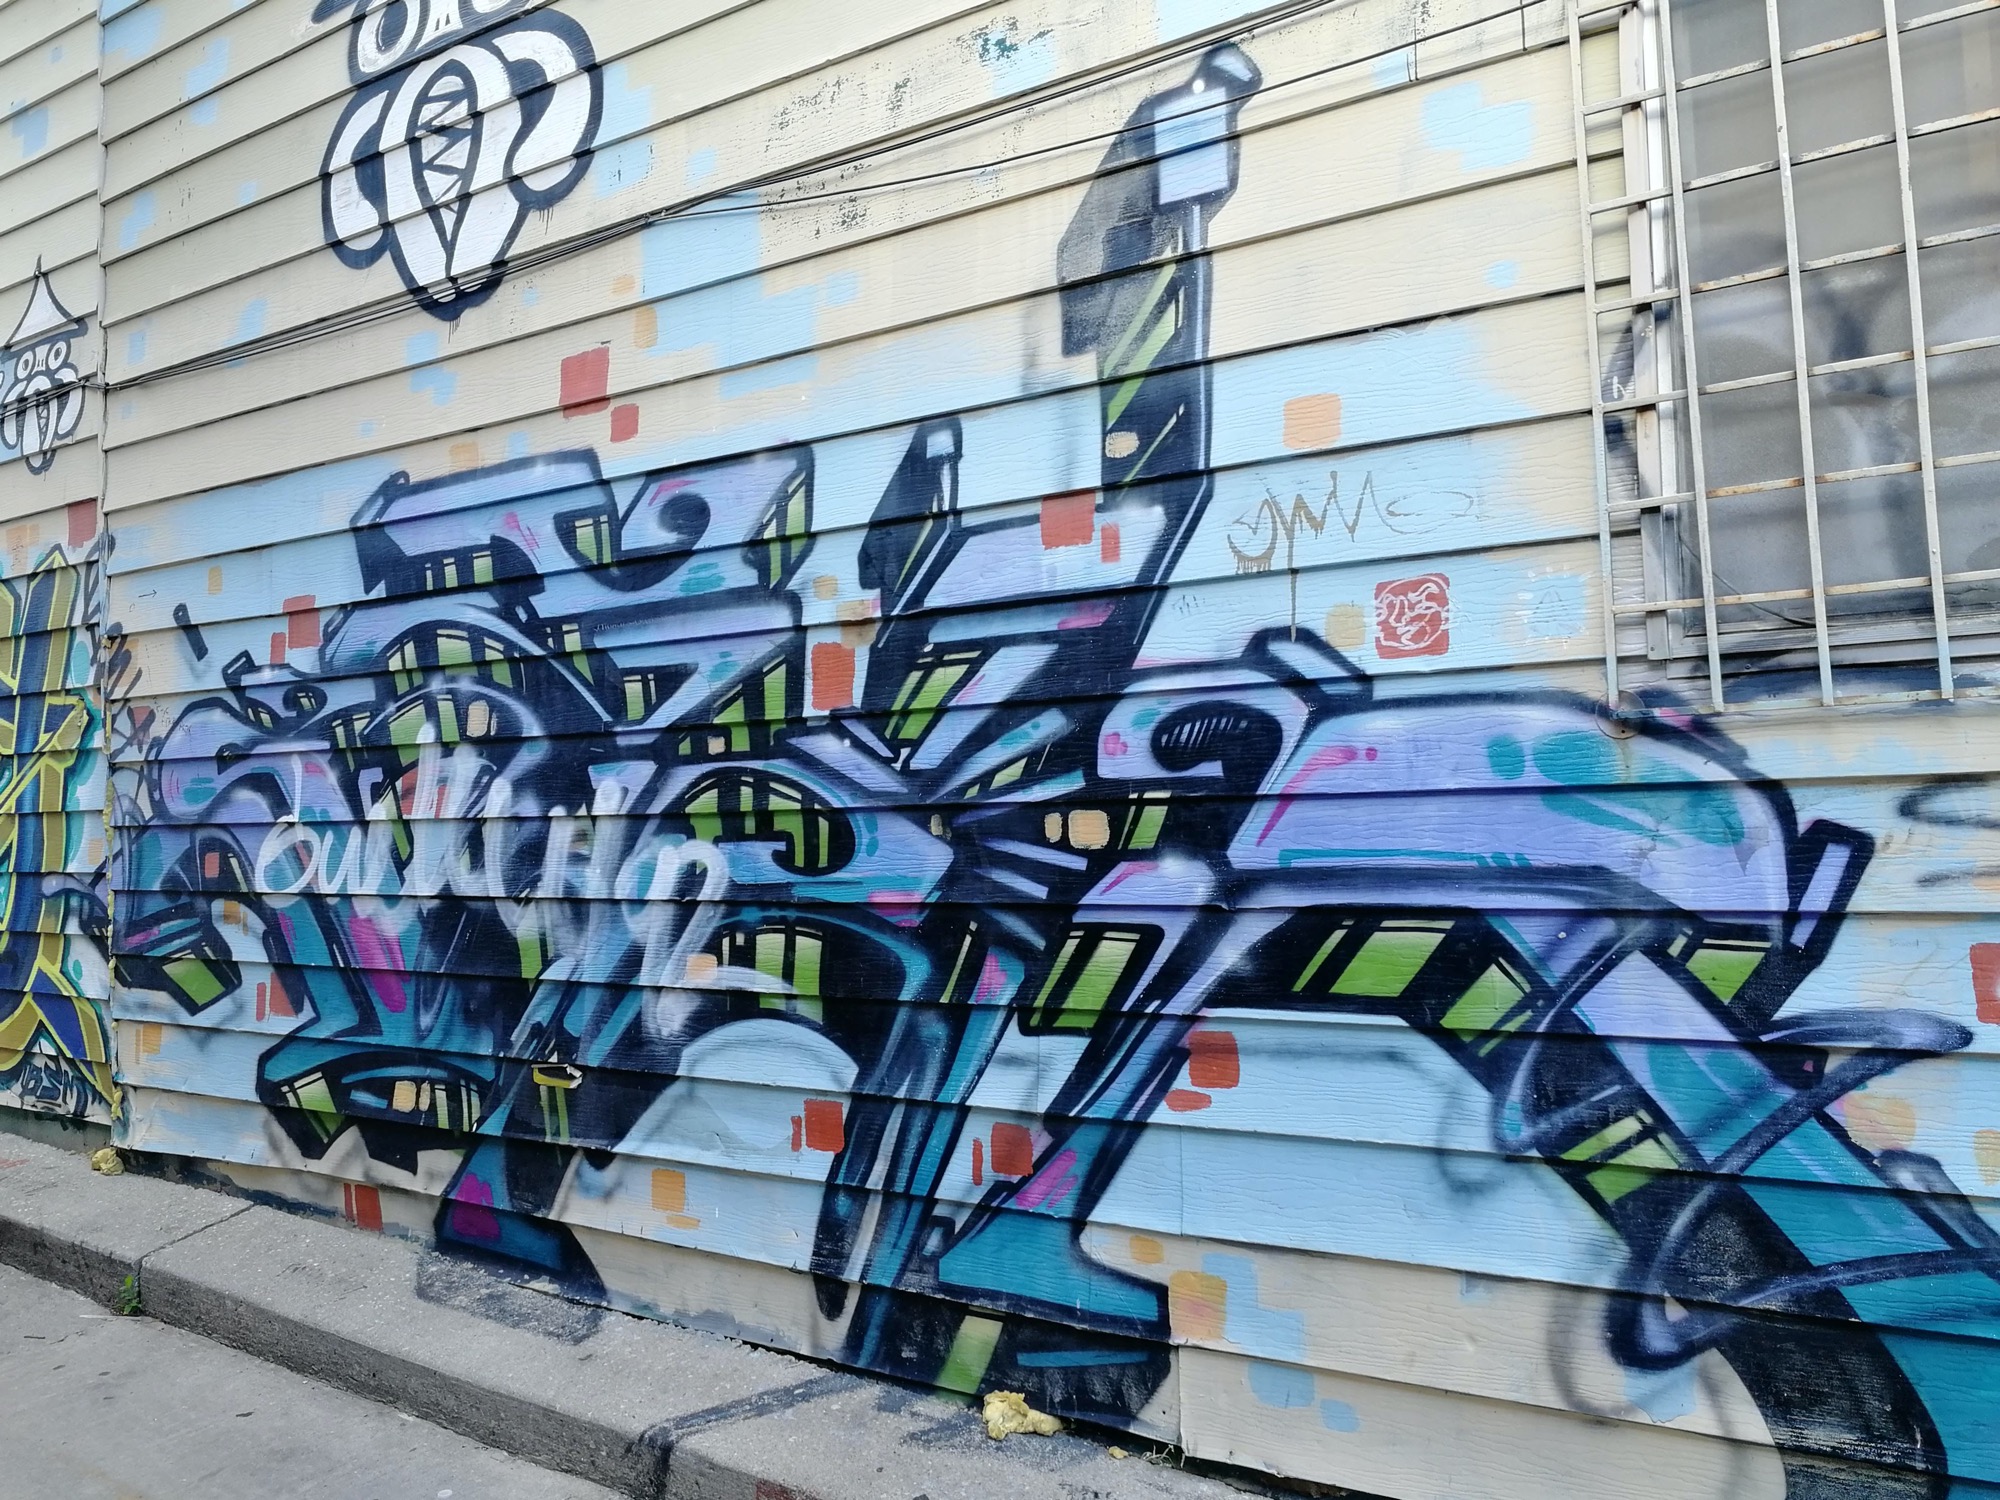 Graffiti 2417  captured by Rabot in Toronto Canada